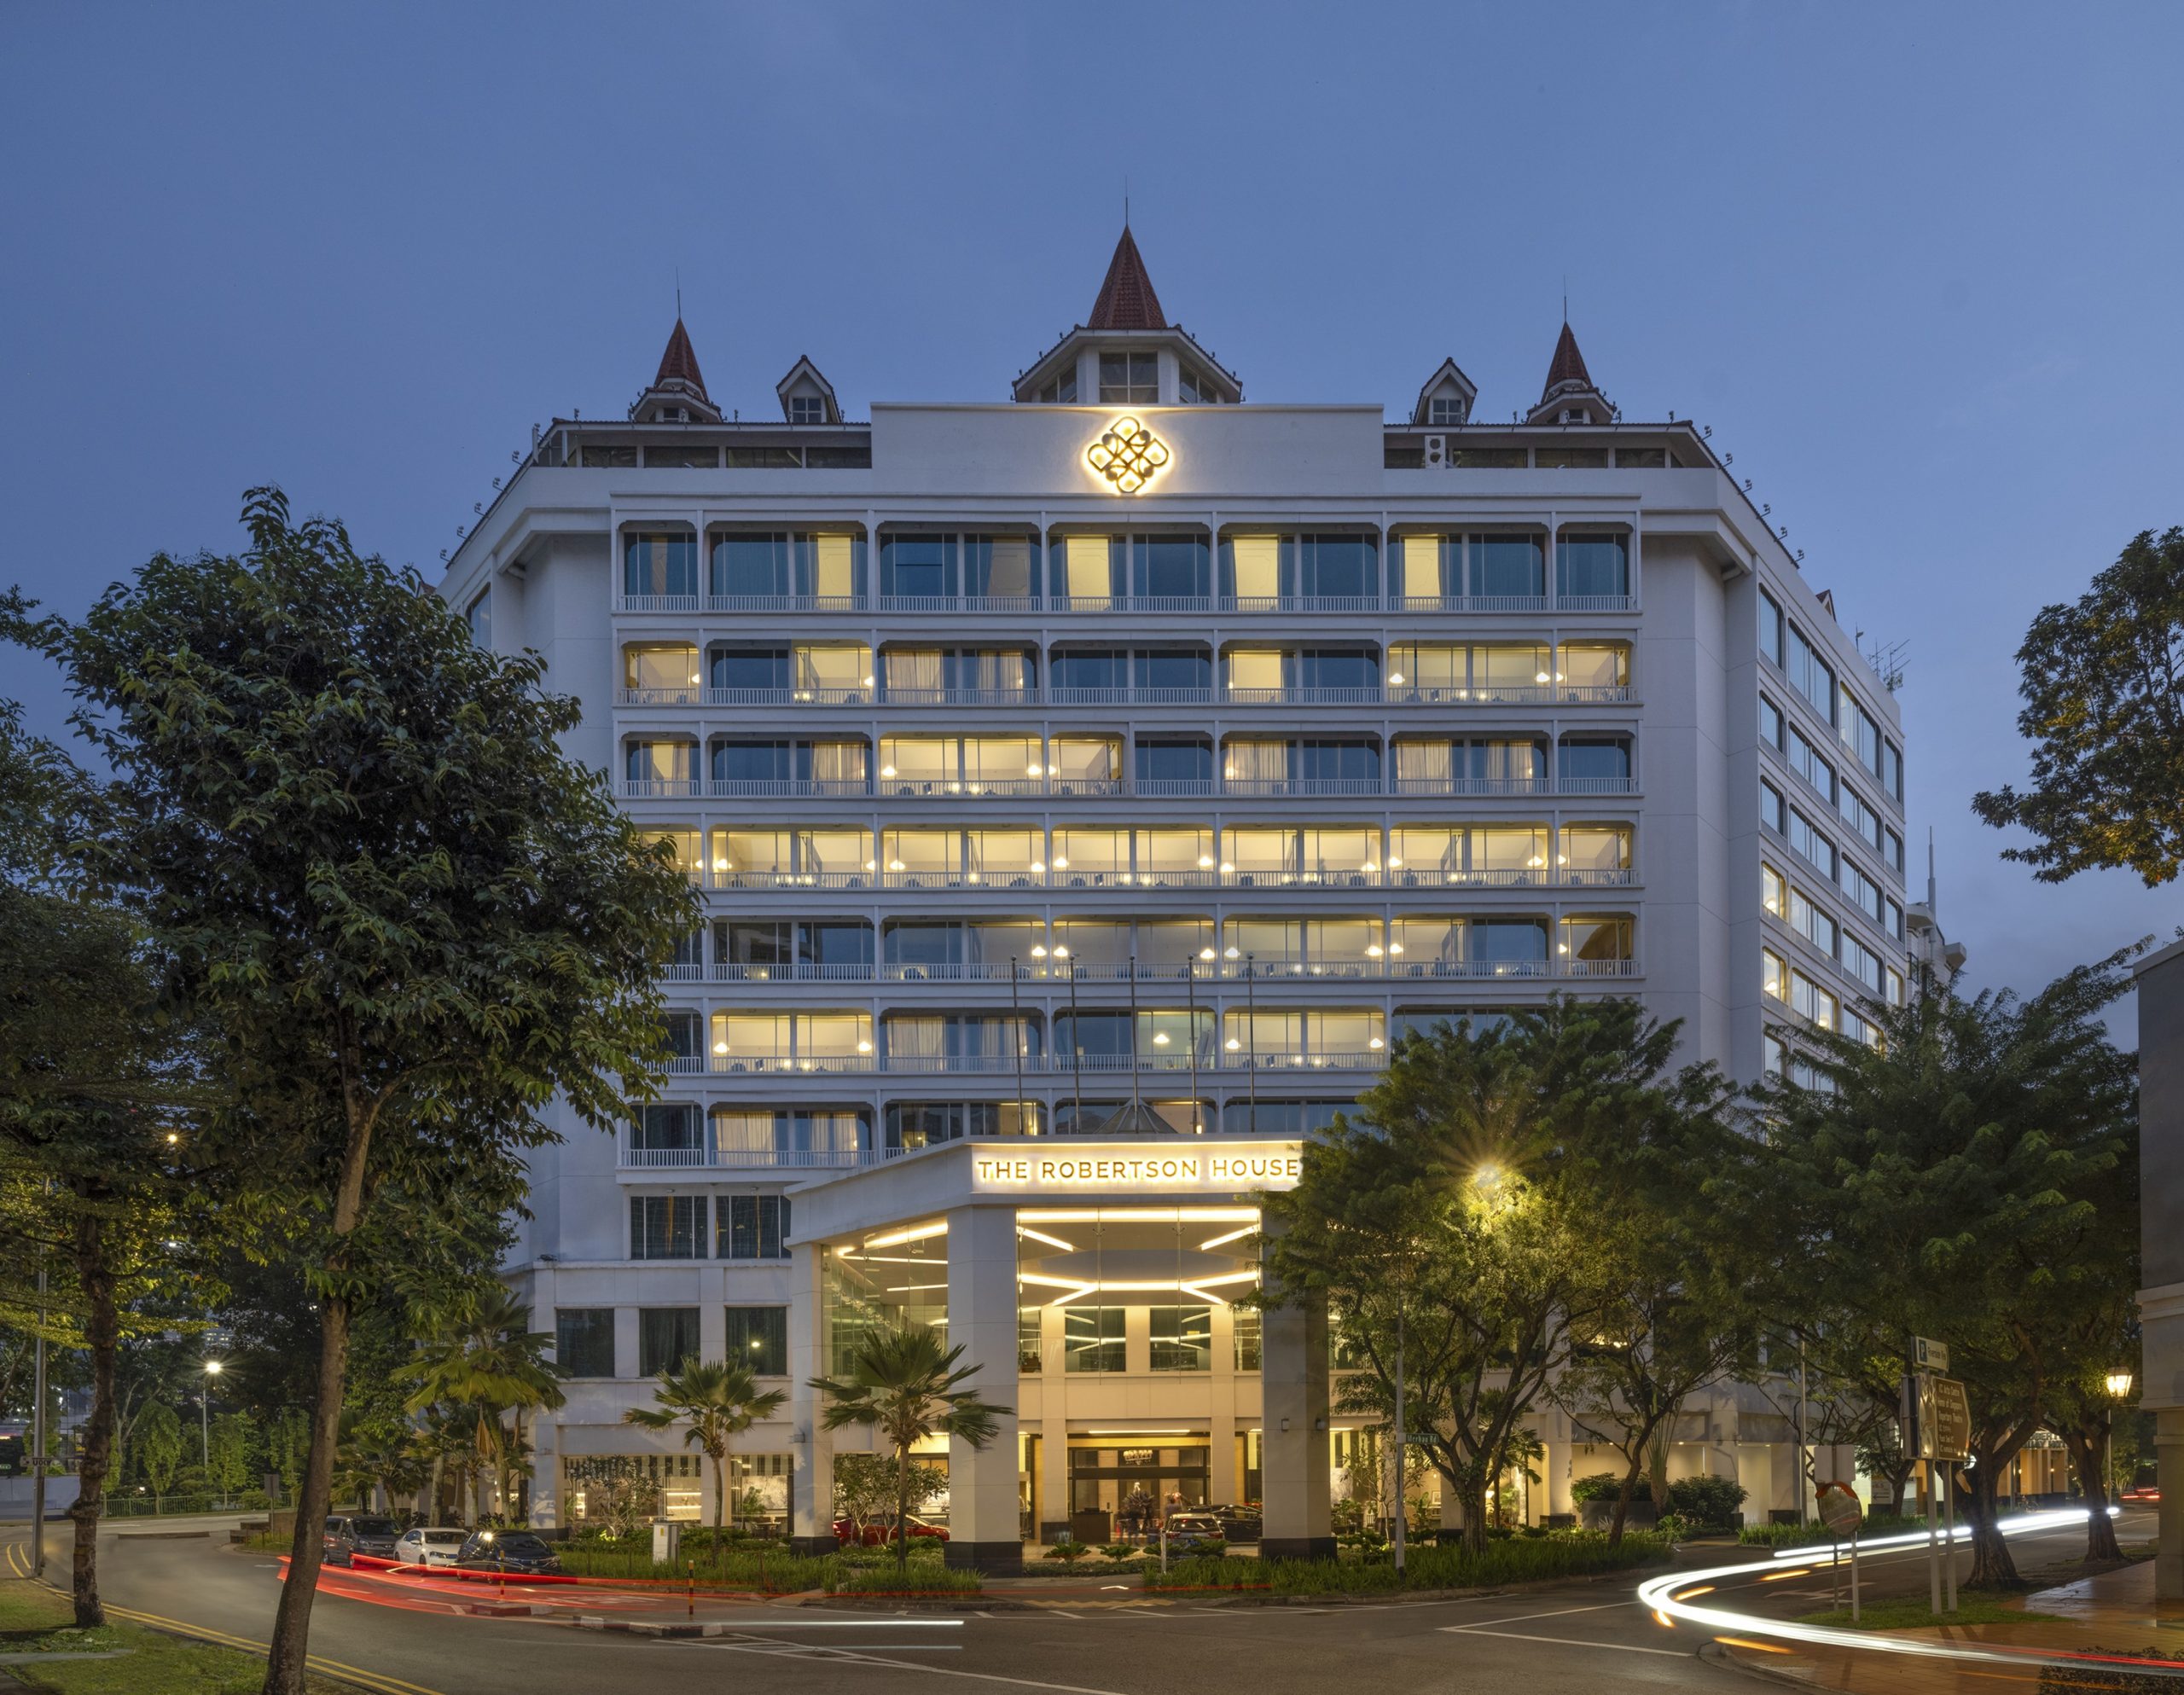 CapitaLand Ascott Trust up 16% through operating performance and acquisitions